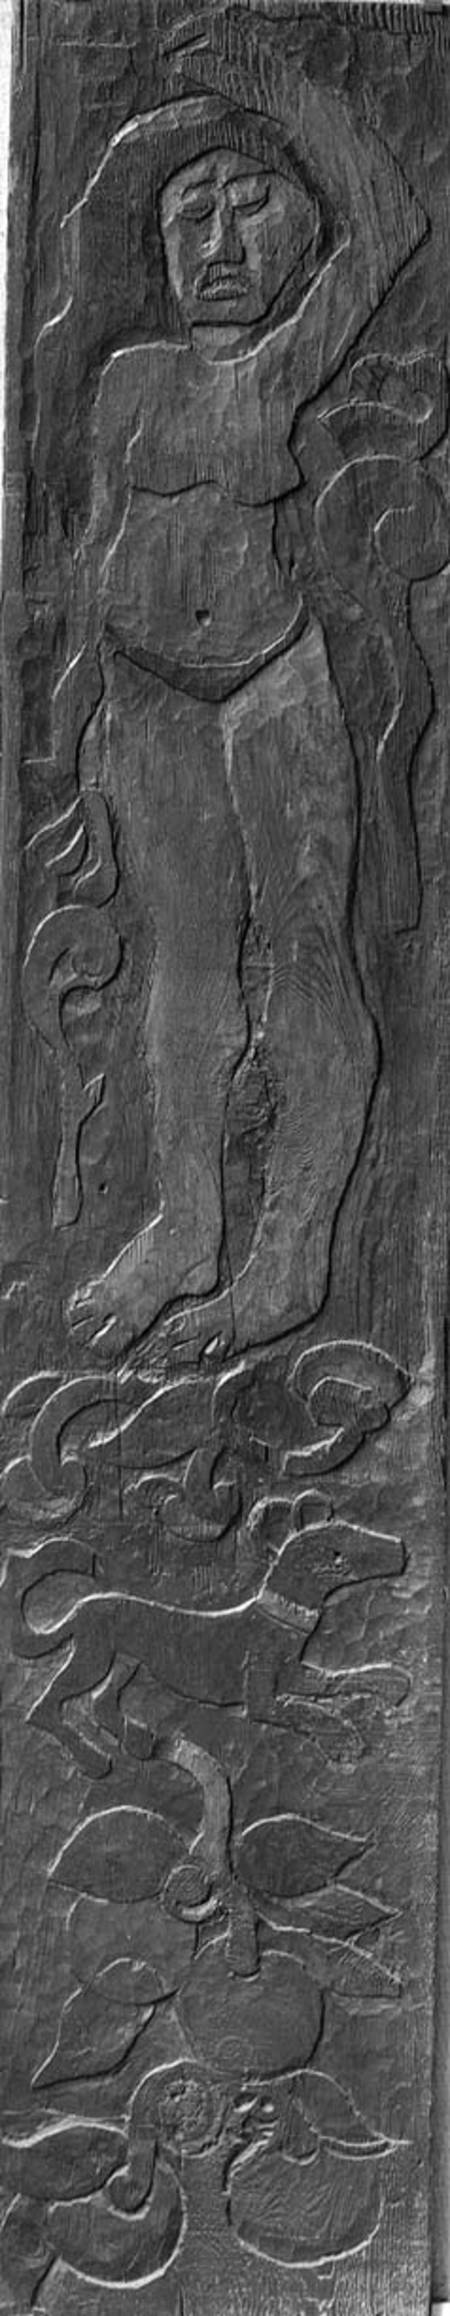 Carved vertical panel from the door frame of Gauguin's final residence in Atuona on Hiva Oa (Marques à Paul Gauguin